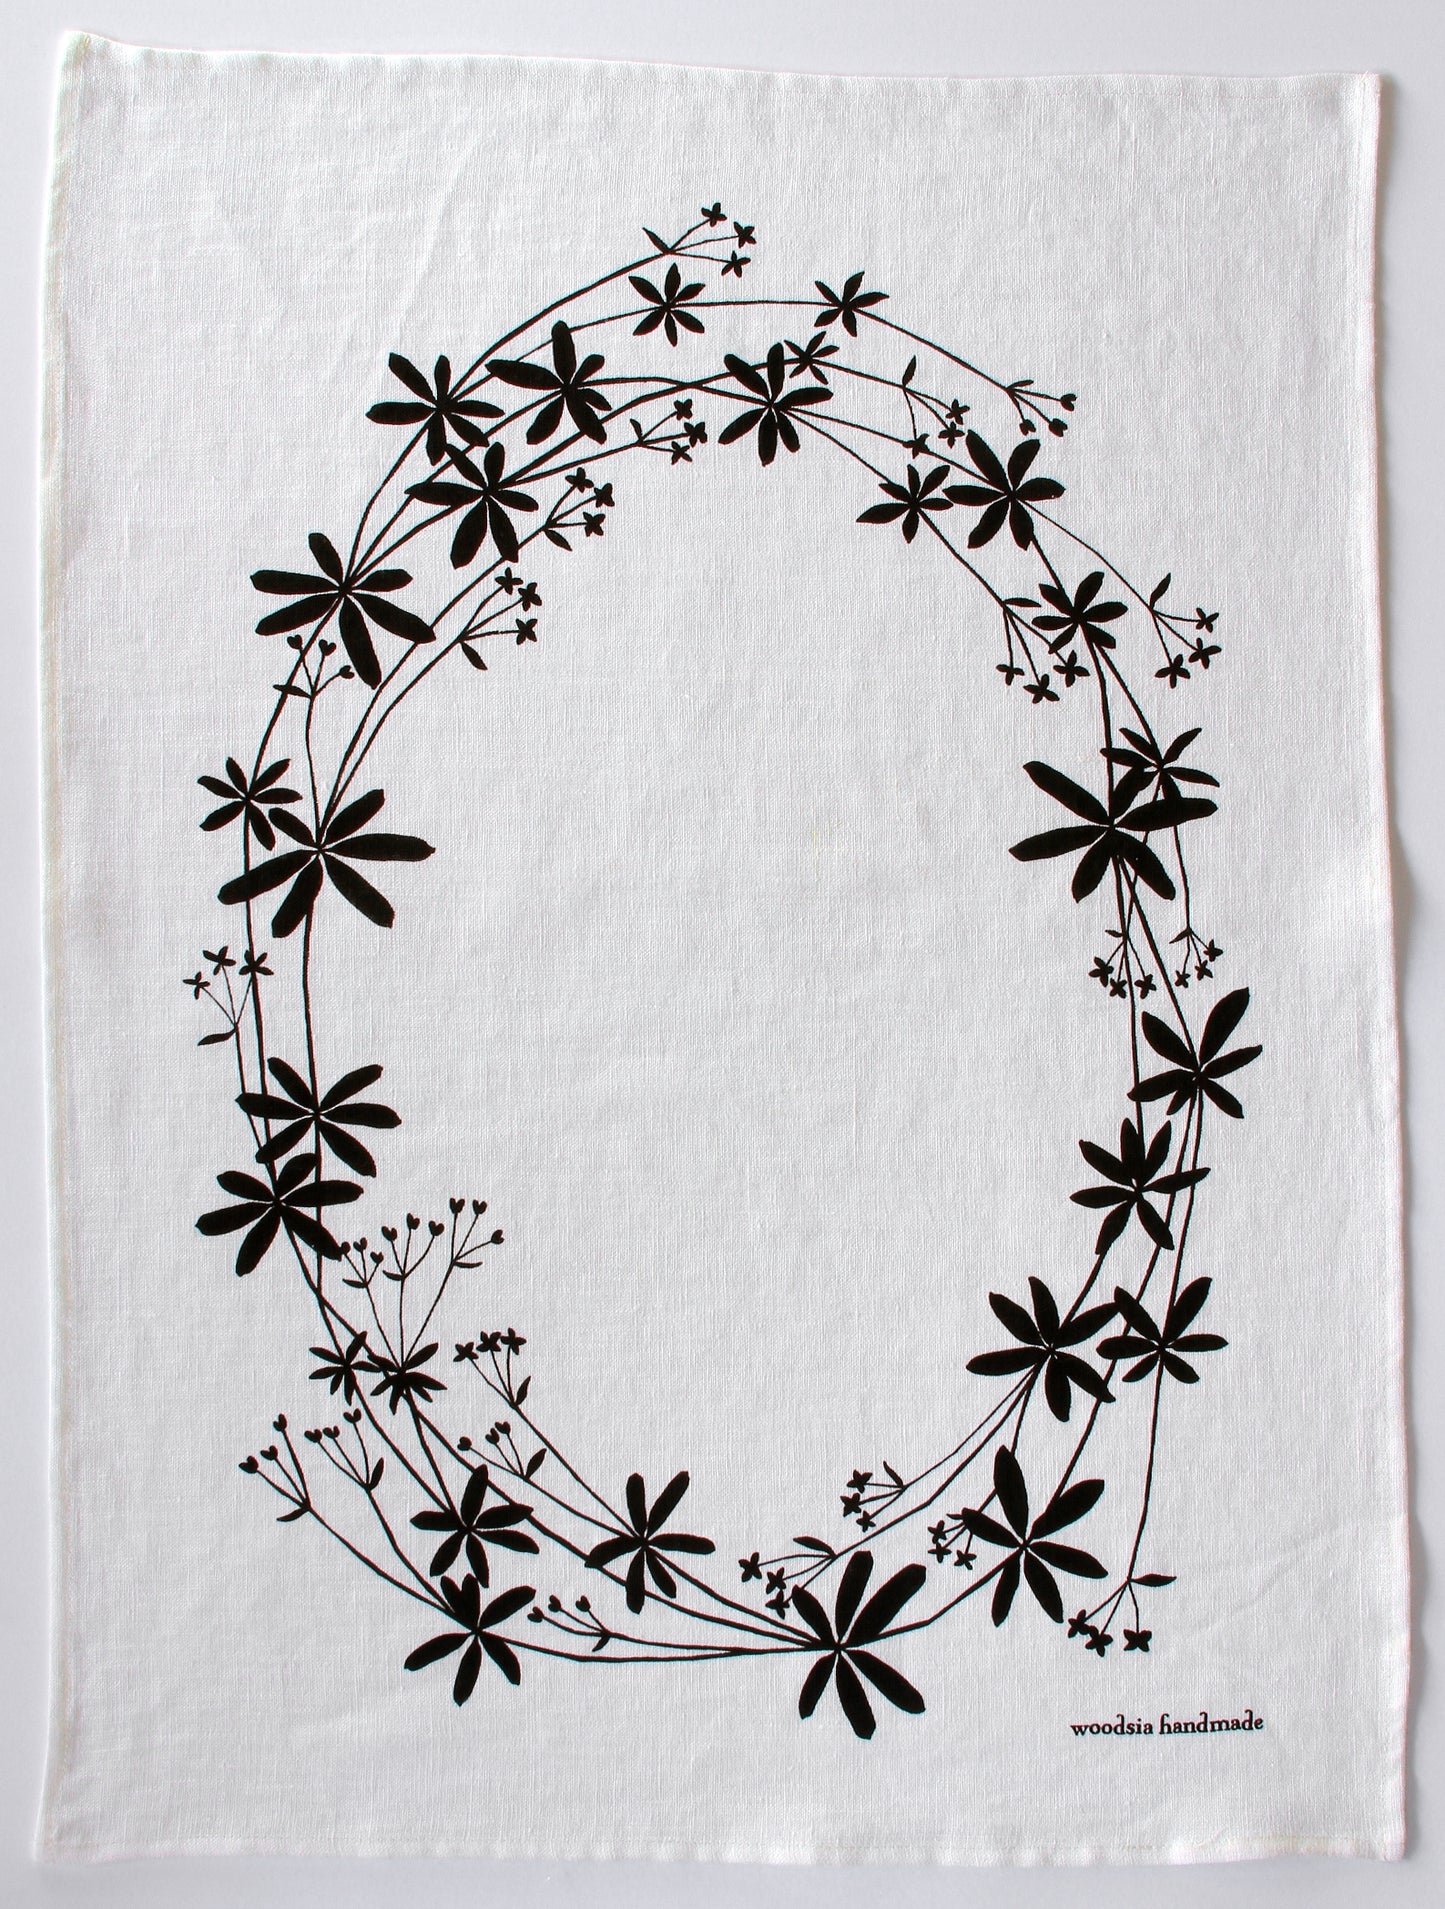 Bedstraw Kitchen Towel in Ink on White Linen